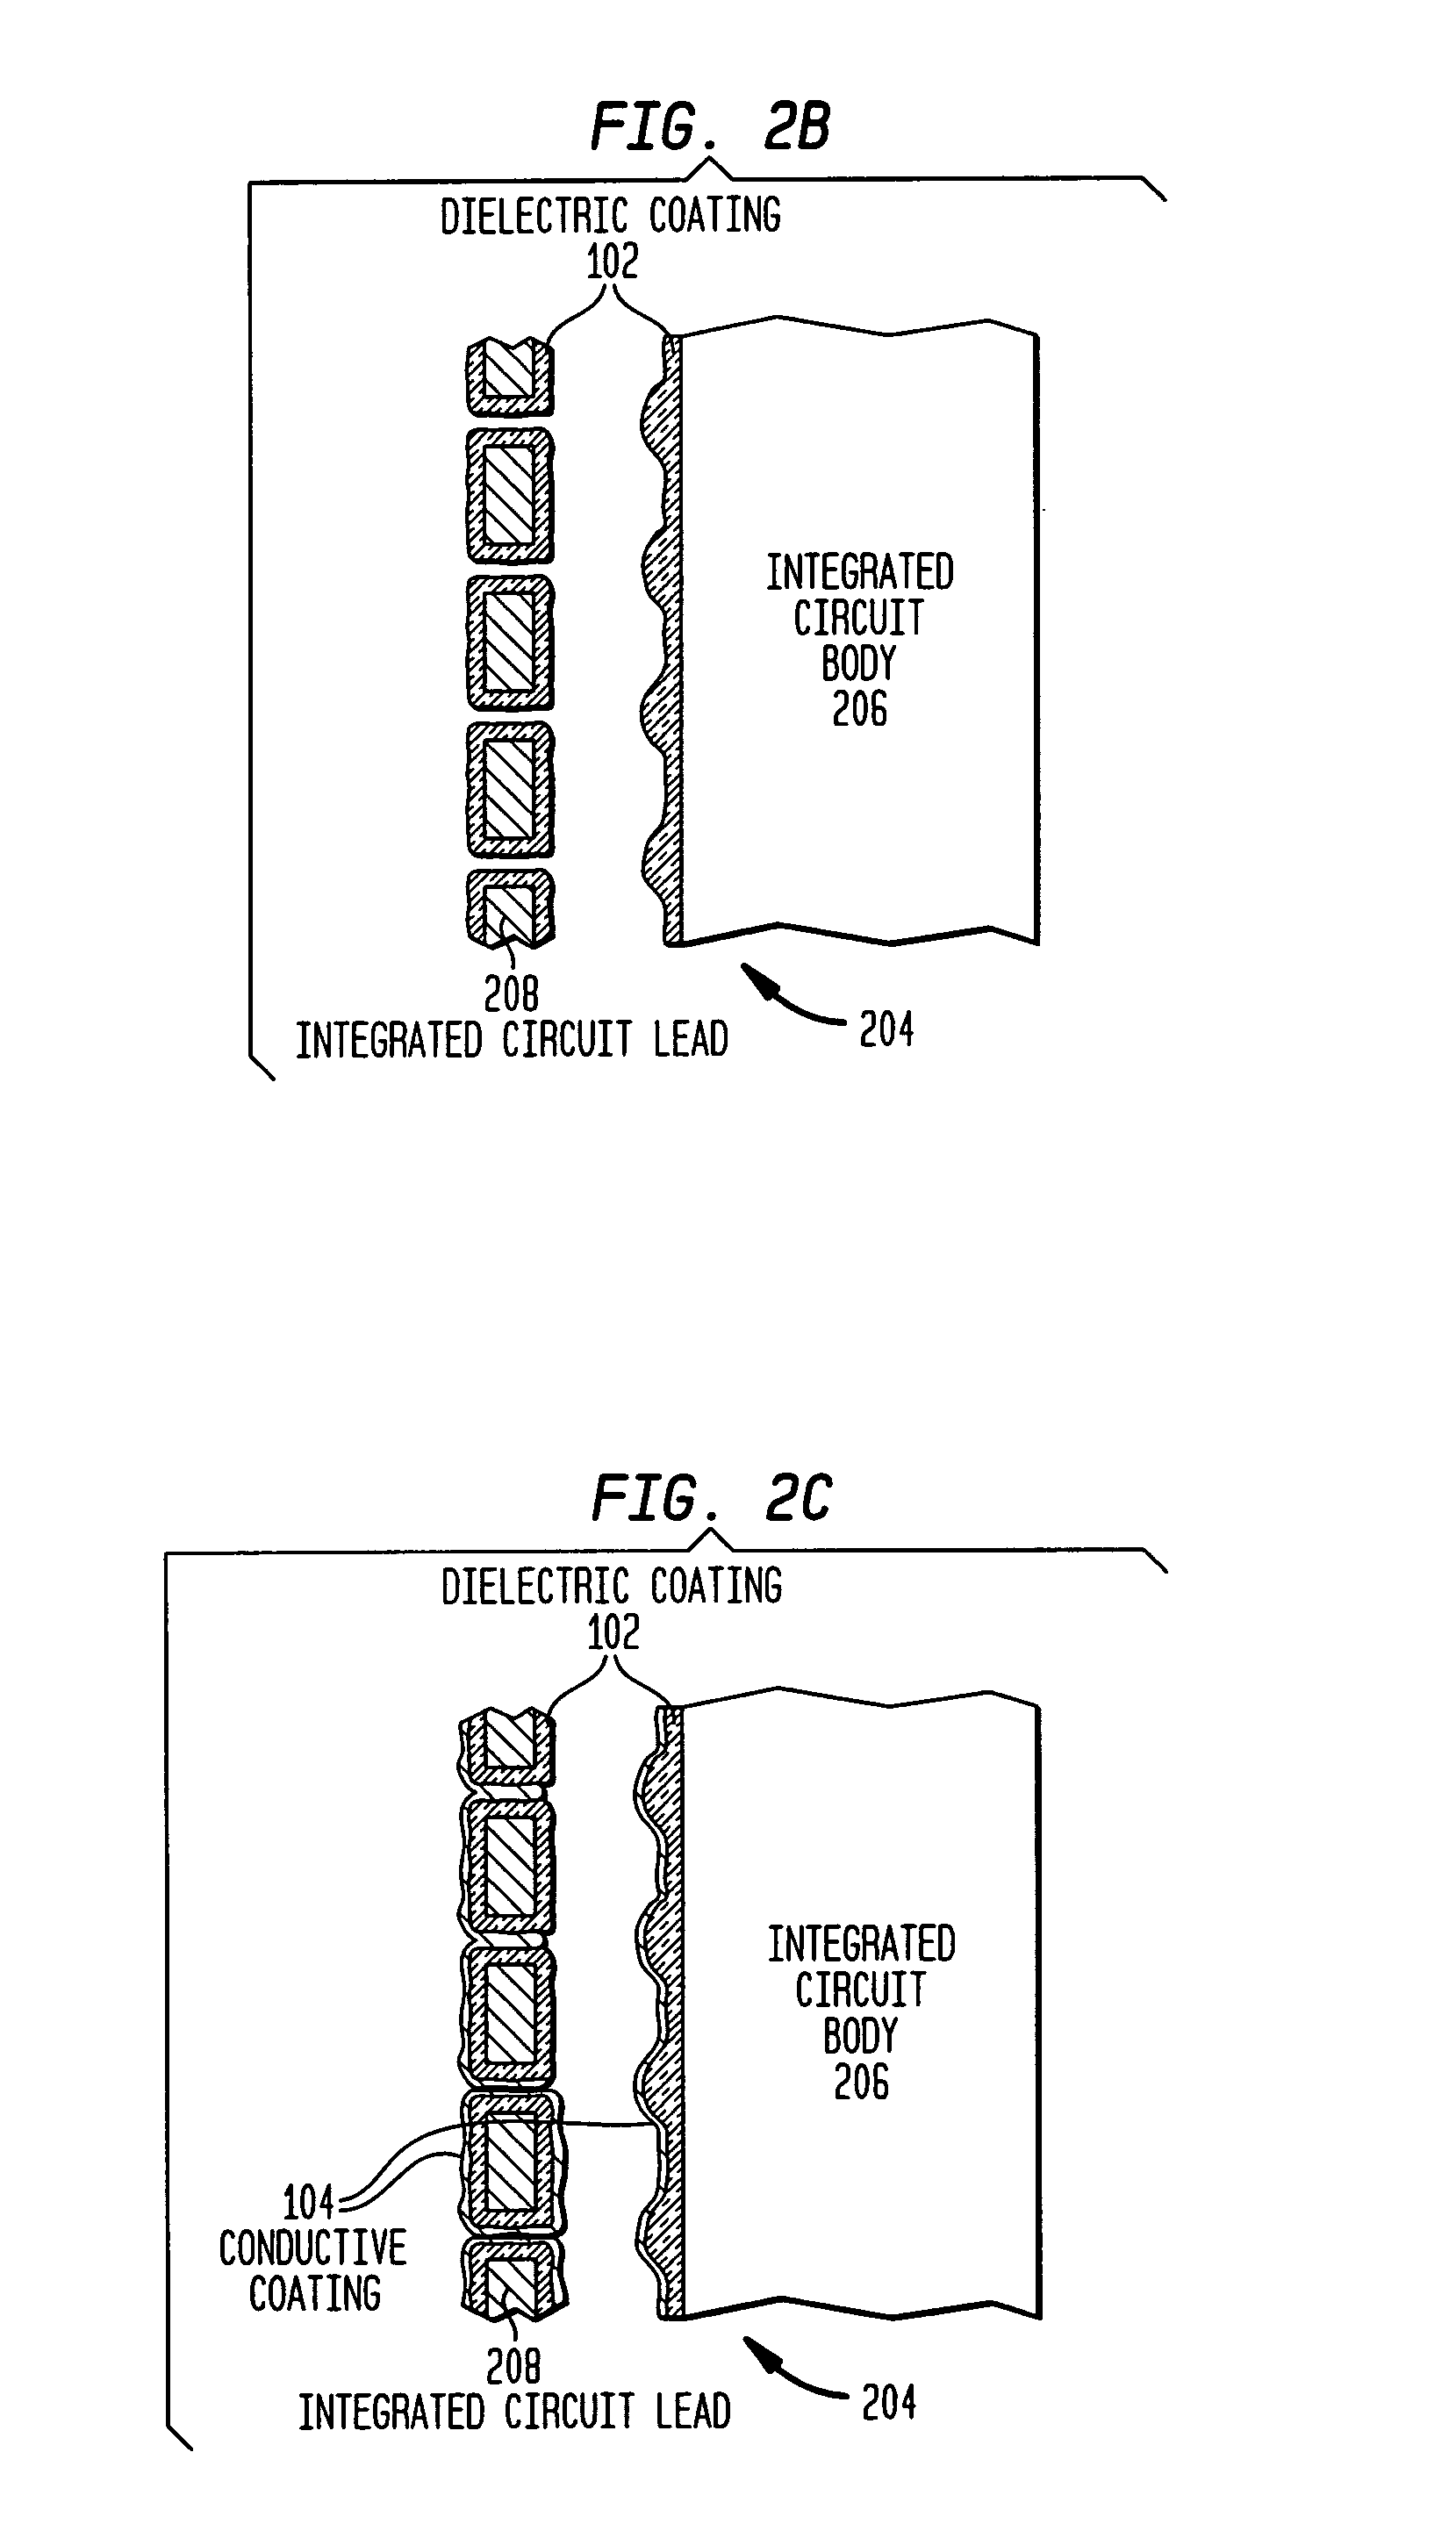 Interference signal decoupling on a printed circuit board